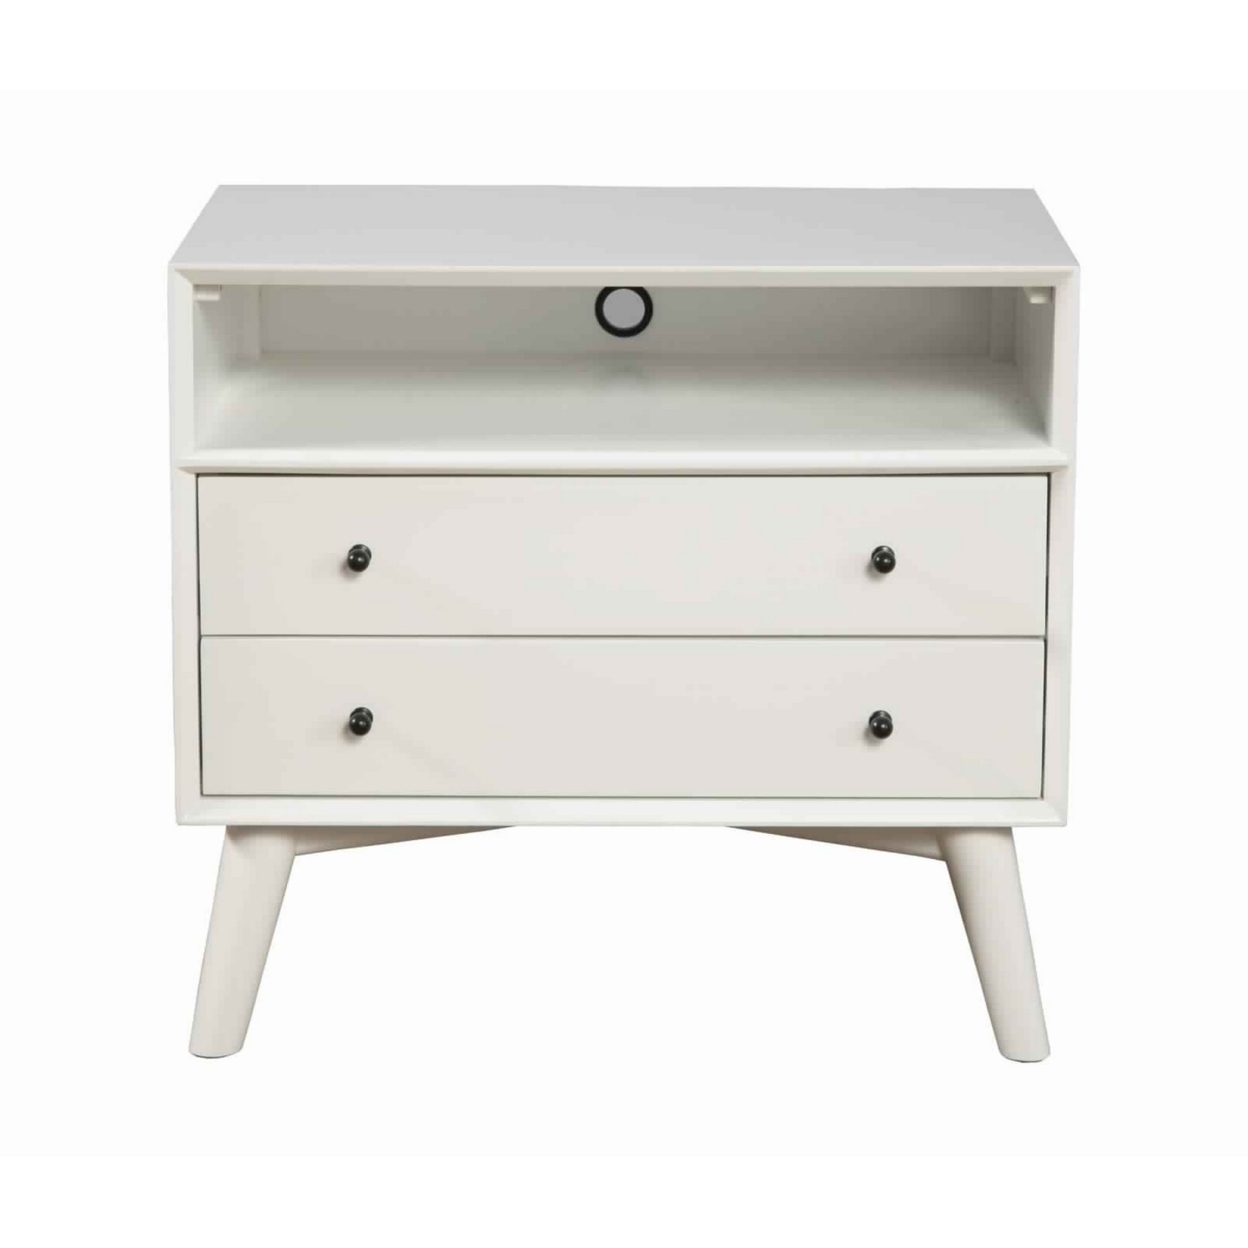 2 Drawer Wooden Nightstand With Open Compartment And Splayed Legs, White- Saltoro Sherpi